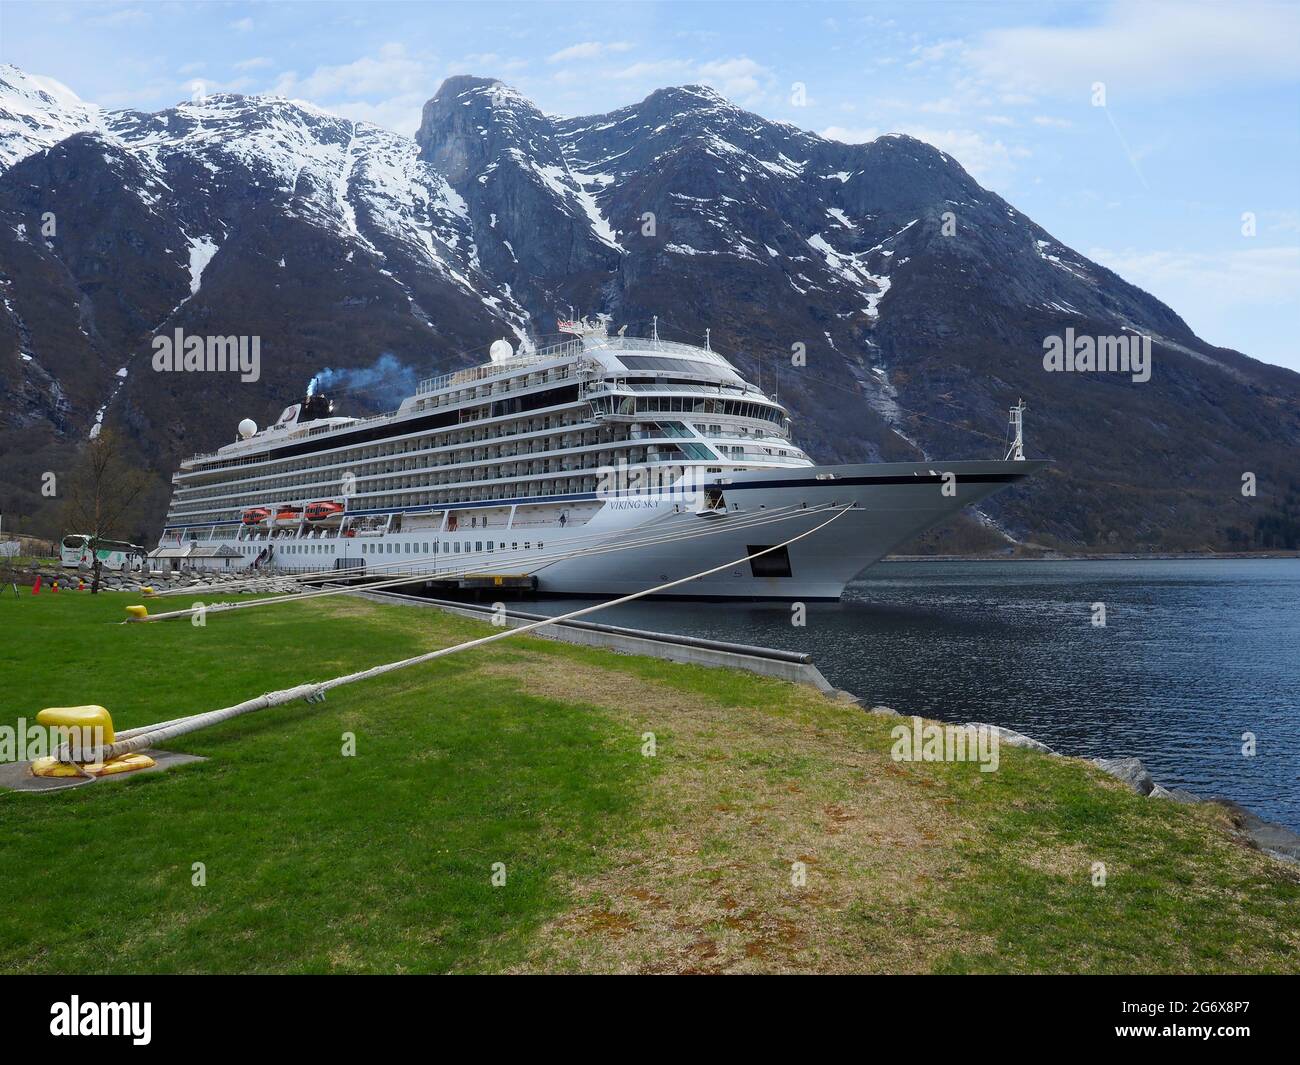 Viking Sky moored in the village of Eidfjord surrounded by mountains Stock Photo